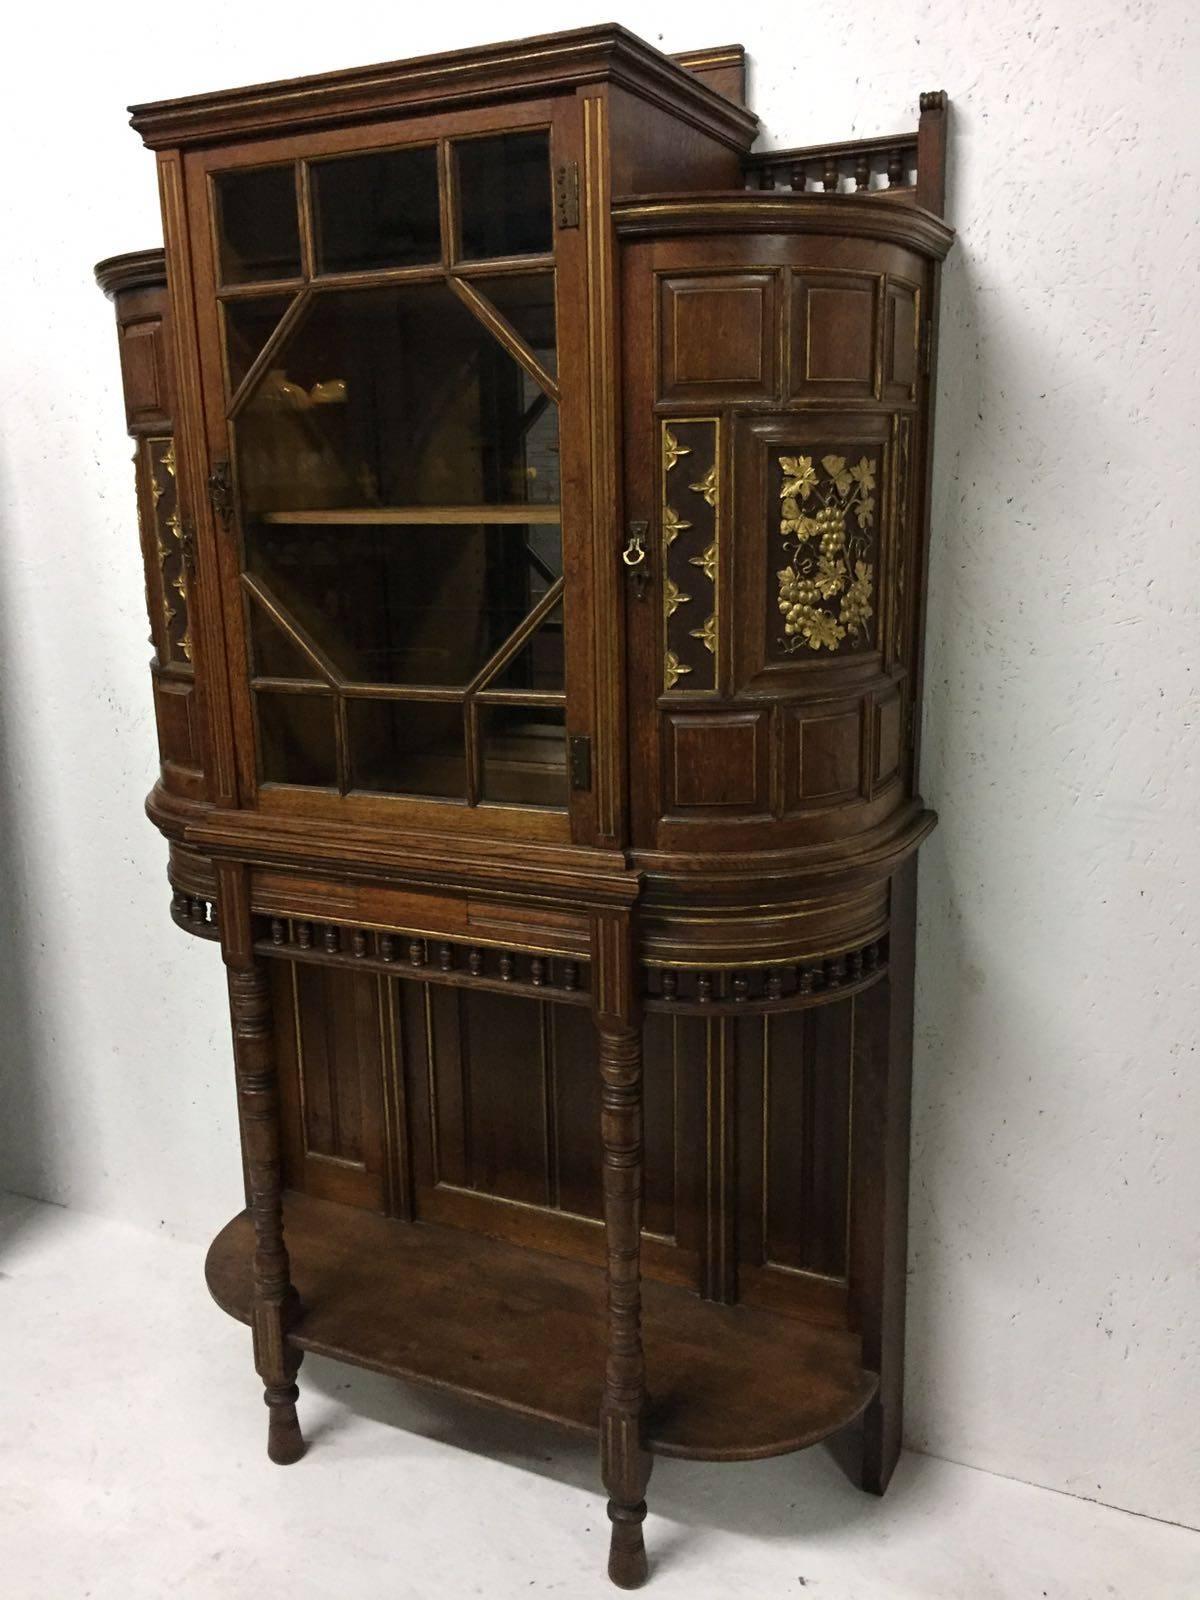 Bruce Talbert attributed to Gillows. 
A rare Aesthetic Movement oak cabinet with parcel-gilt carving to the demilune doors depicting vine grapes and a butterfly to the right, and the passion of Pomegranates carved to the left.

A similar corner